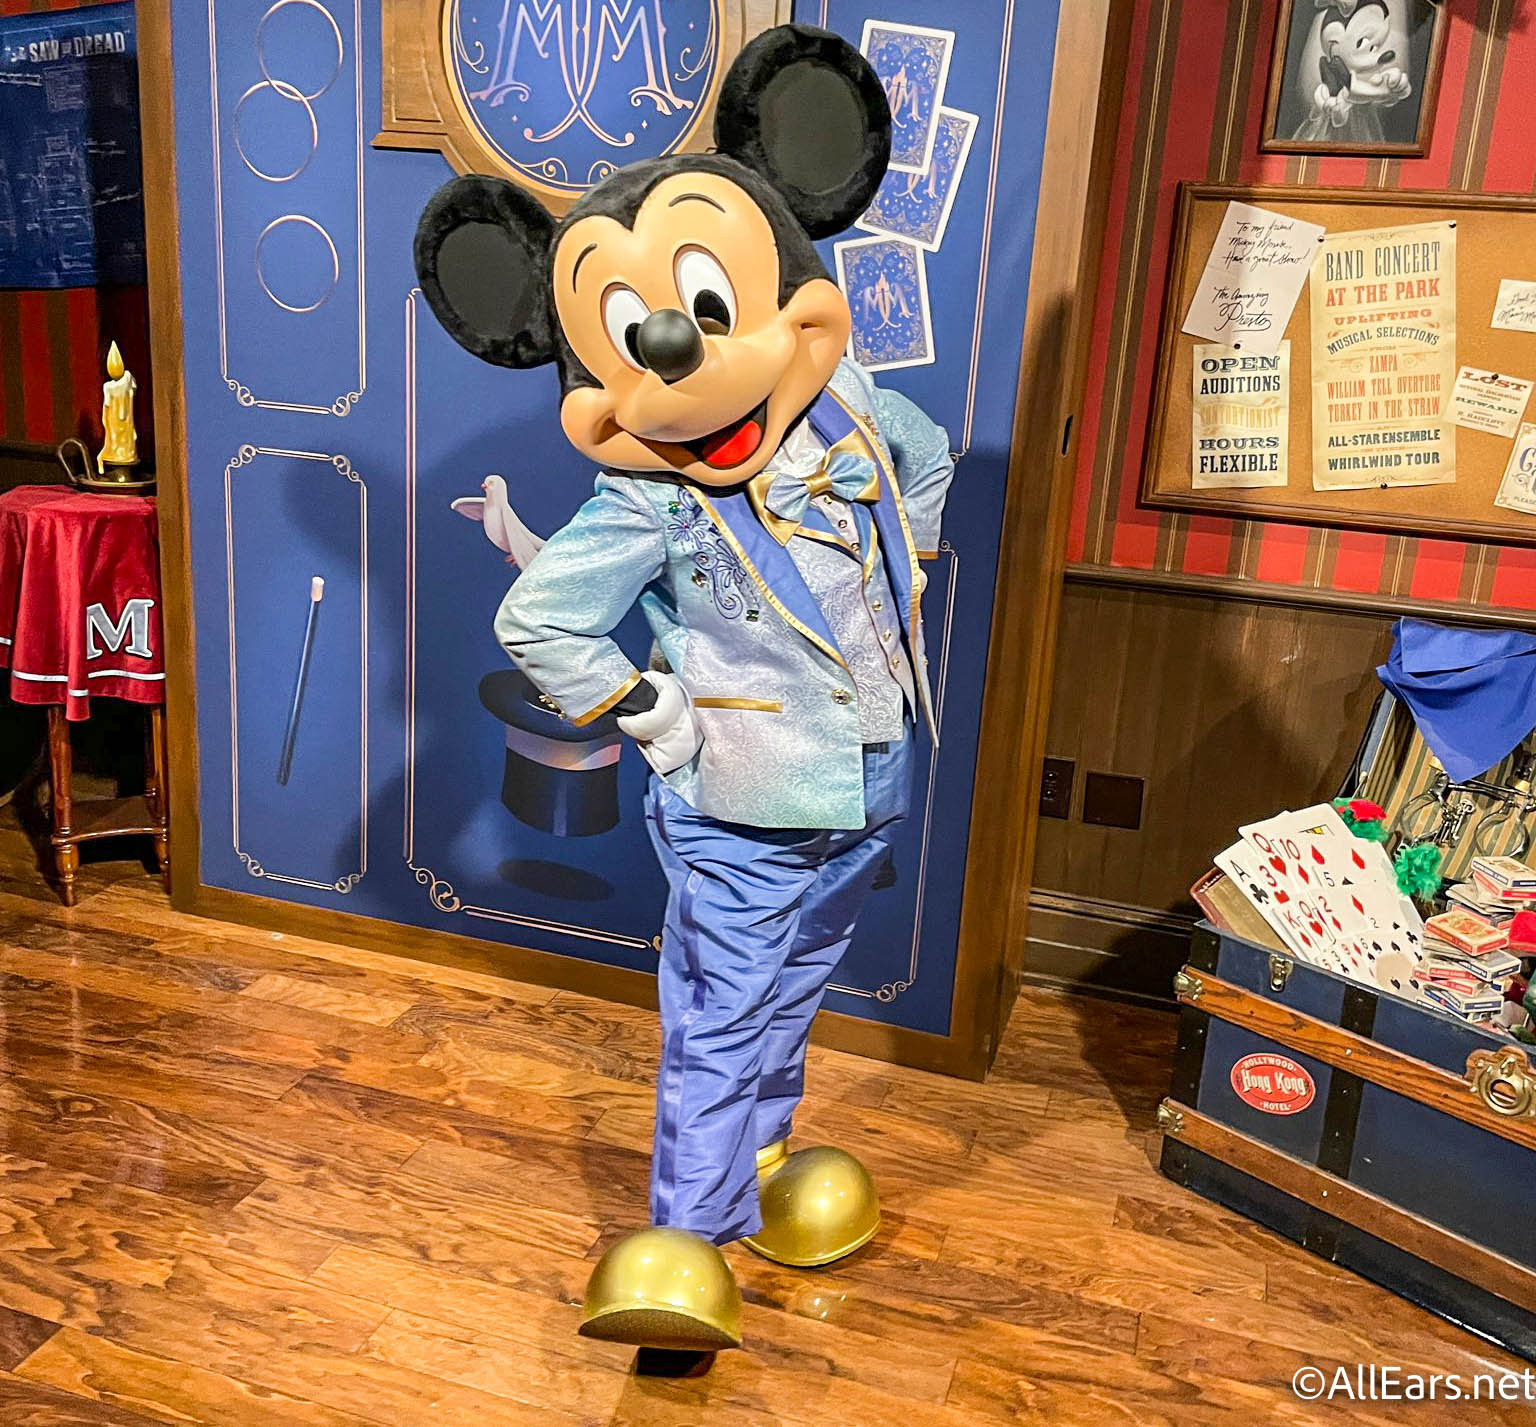 https://allears.net/wp-content/uploads/2021/10/wdw-2021-magic-kingdom-town-square-theater-mickey-mouse-meet-and-greet-character-sighting-modified-50th-anniversary-costume-9.jpg